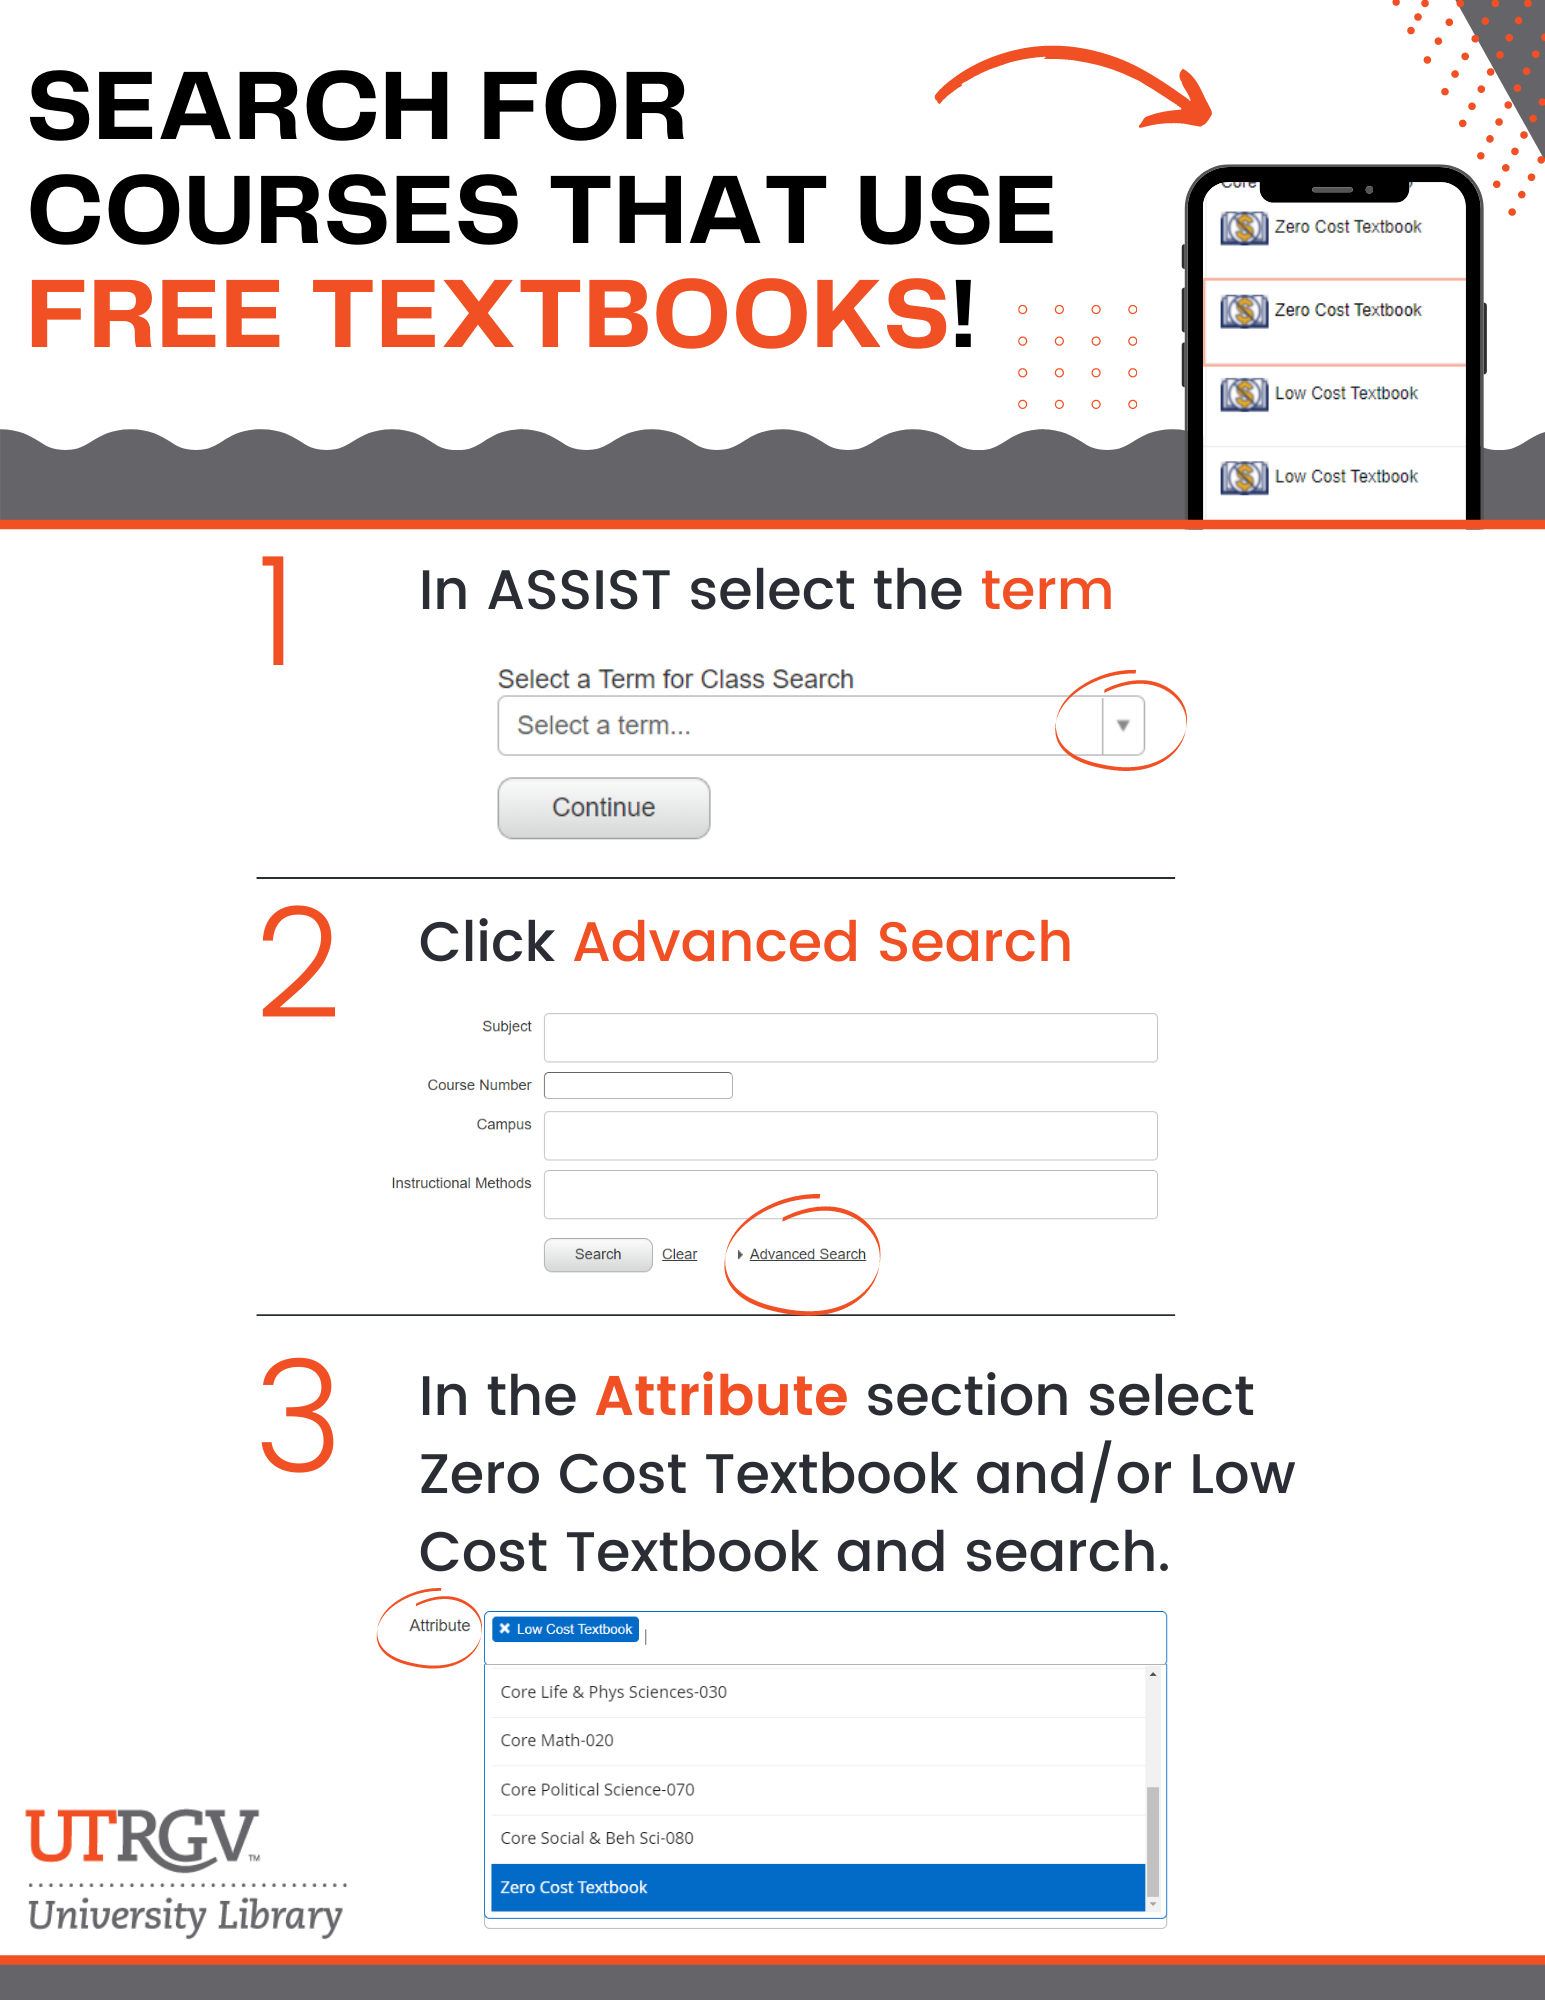 Flyer - Search for courses that use free Textbooks. 1. In ASSIST select the term. 2. Click on Advanced Search 3. In the Attribute section select Zero Cost Textbook and/or Low Cost Textbook and search.